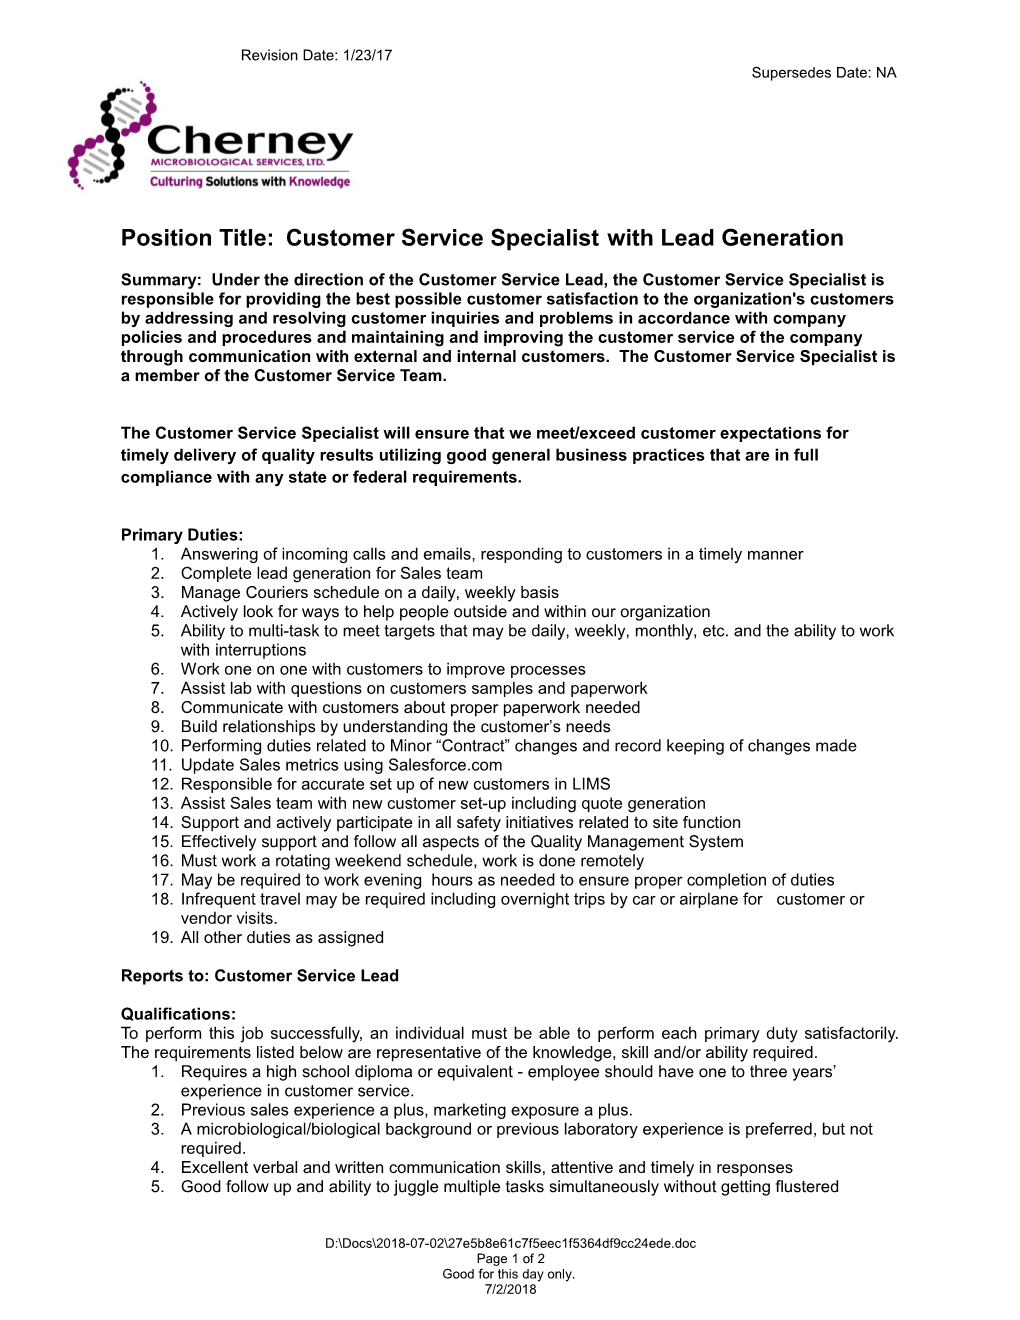 Position Title: Customer Service Specialist with Lead Generation